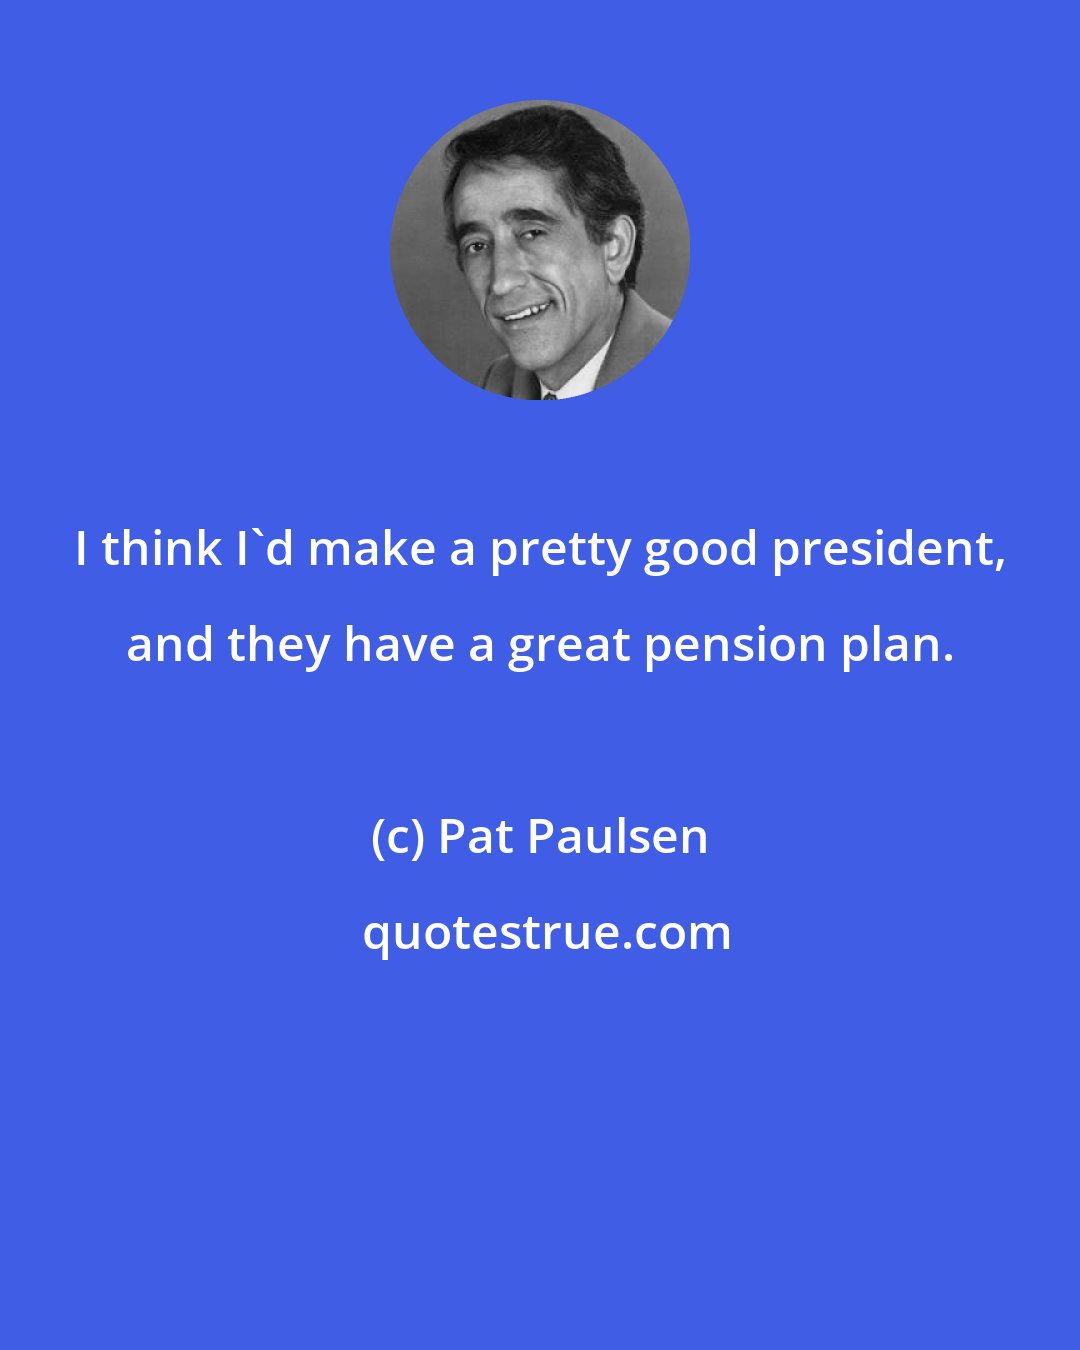 Pat Paulsen: I think I'd make a pretty good president, and they have a great pension plan.